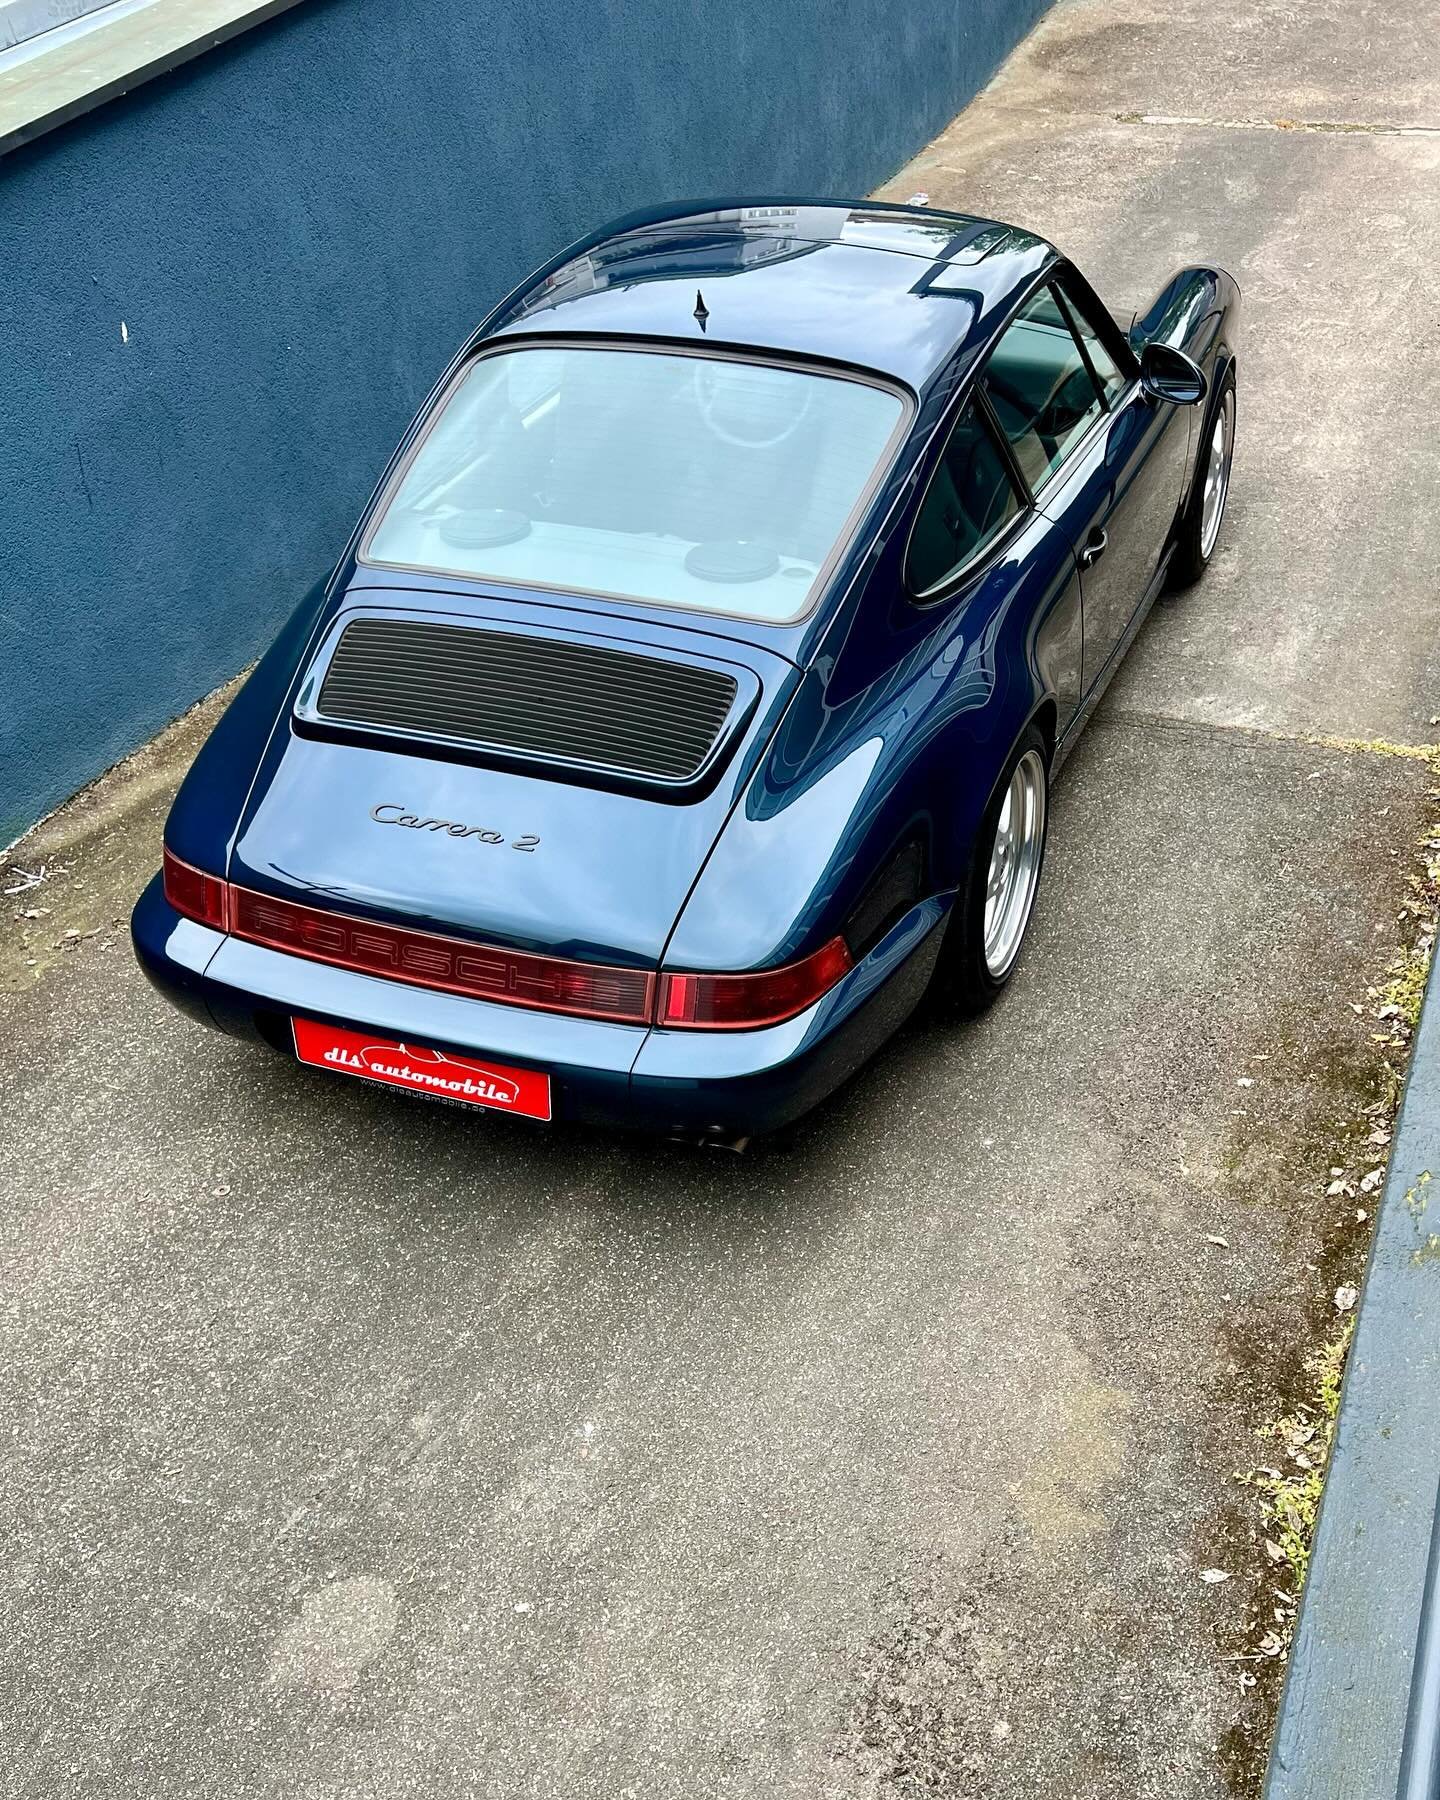 Some facts about our new arrival: Porsche 964 Carrera 2, first delivered in 1993 in Stuttgart, 105&lsquo; km mileage, &sbquo;Amazon green pearl&lsquo; (L39A) over grey leather interior, tiptronic gearbox, sunroof, no rear wiper, with the last owner f